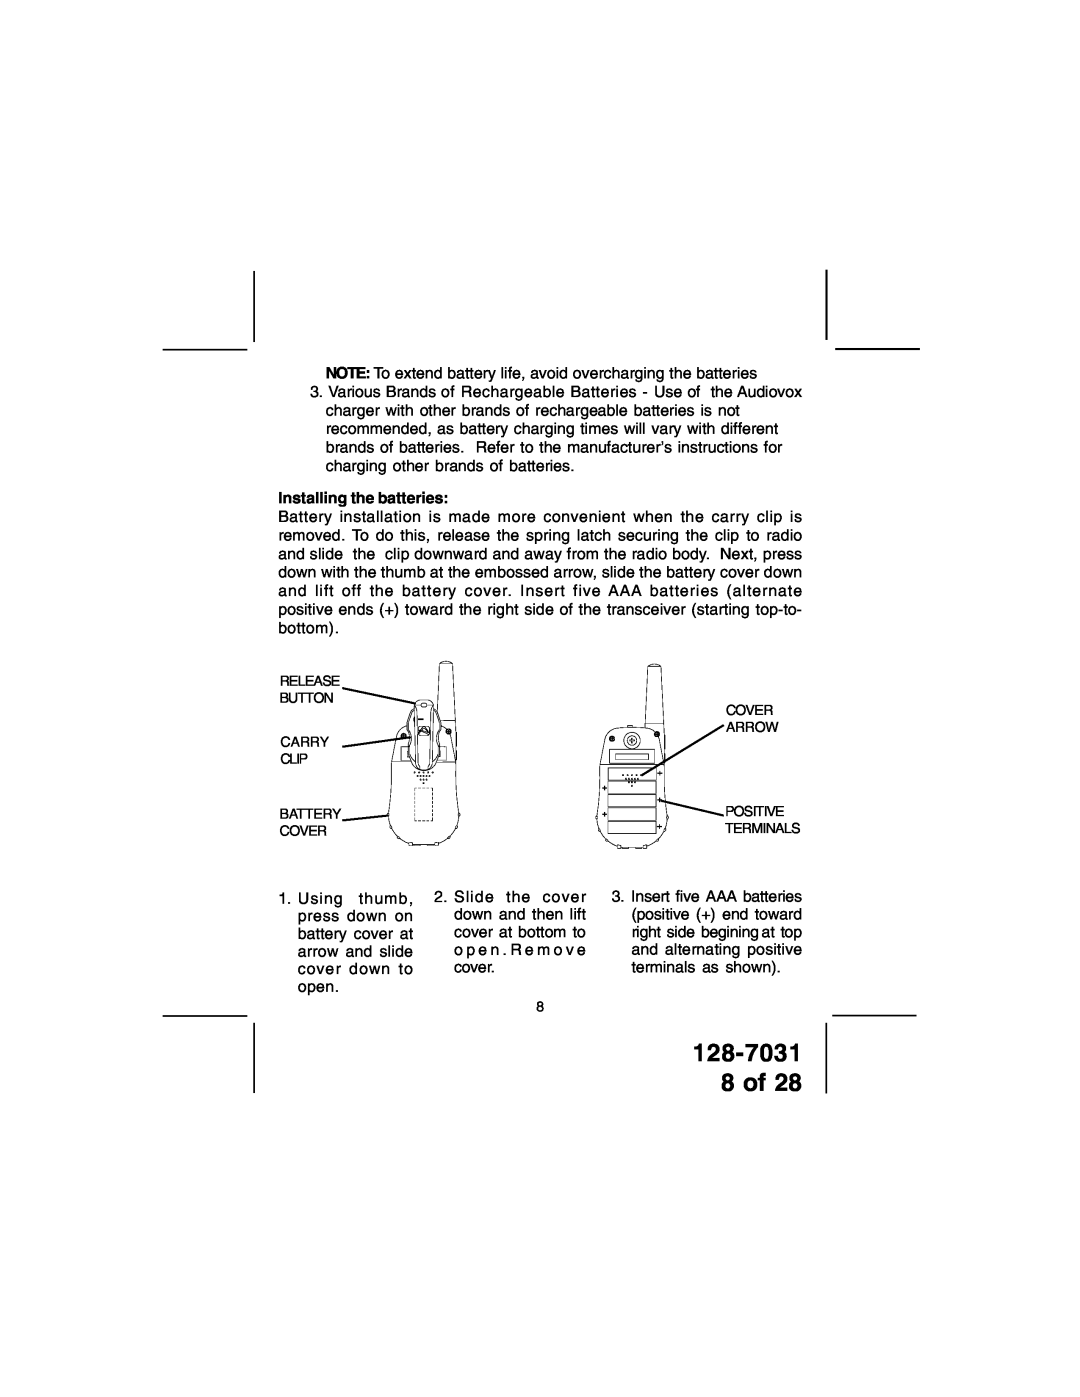 Audiovox owner manual 128-7031 8 of, Installing the batteries 